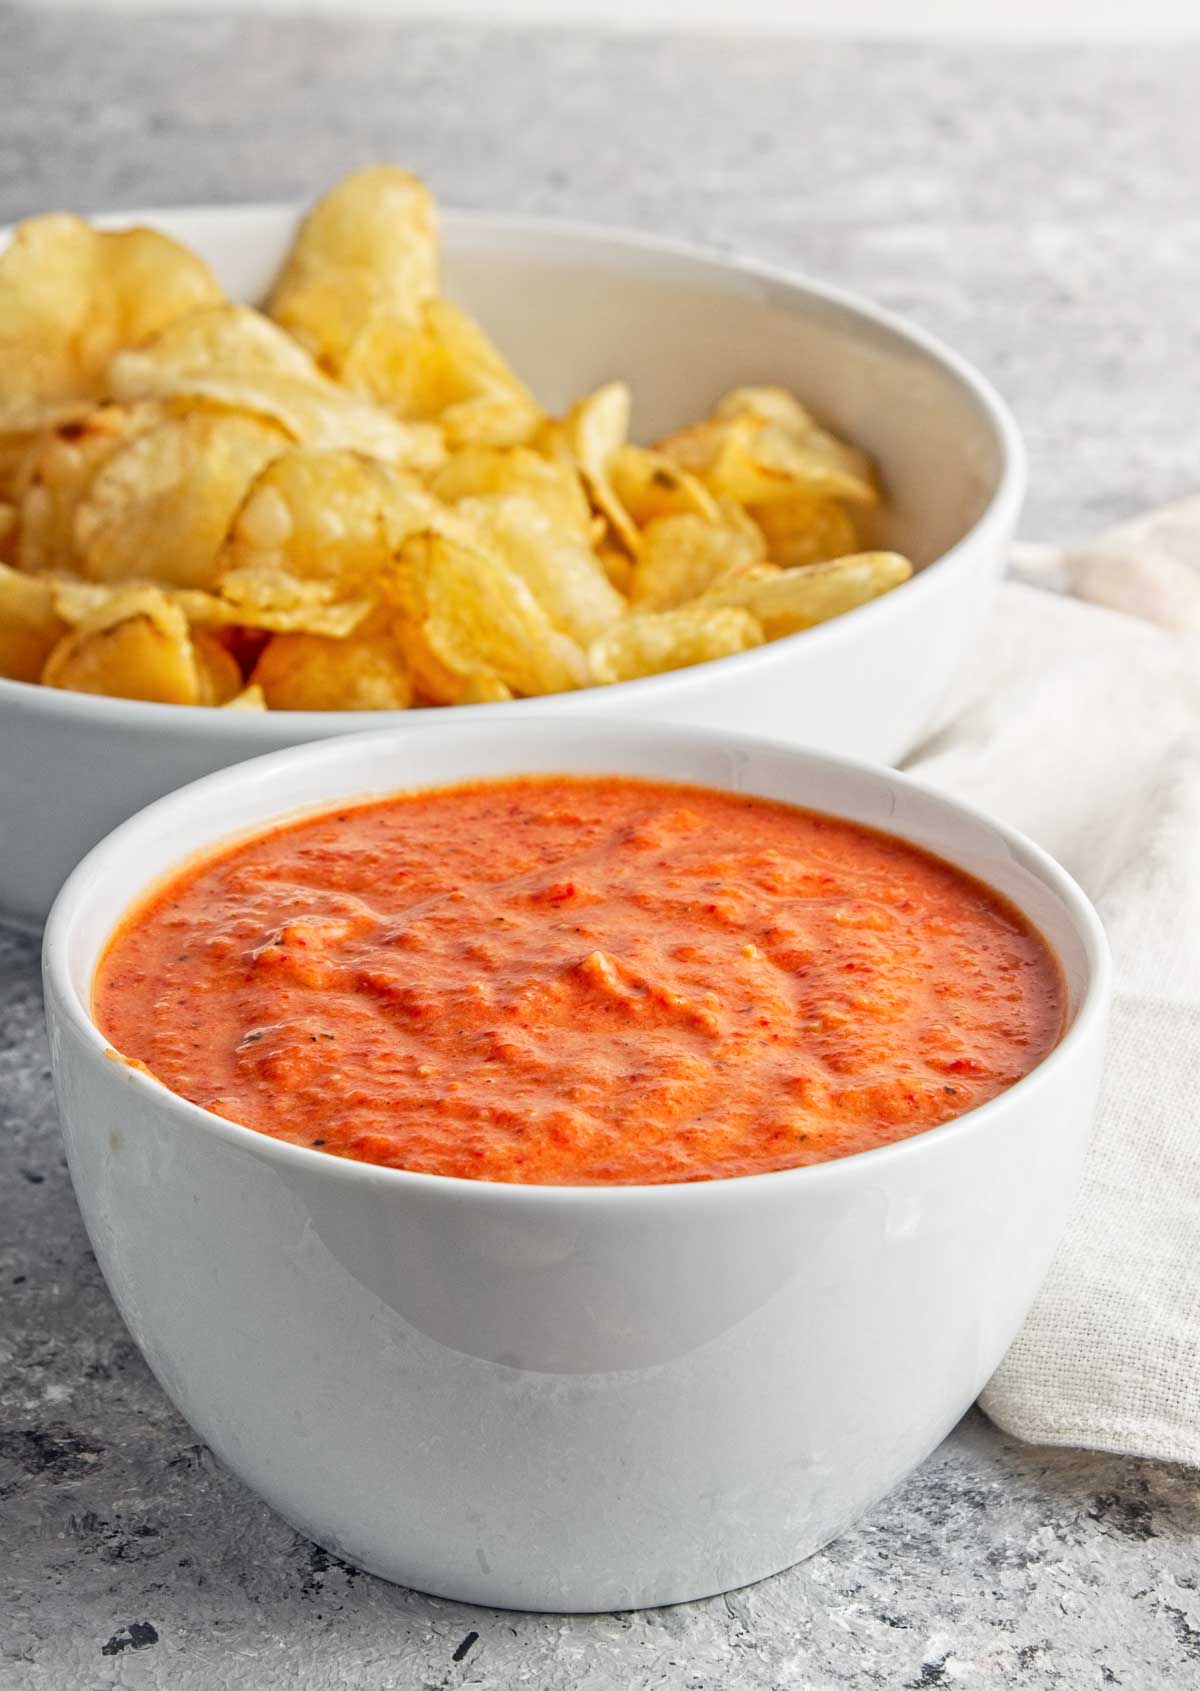 Bowl of roasted red pepper dip with chips